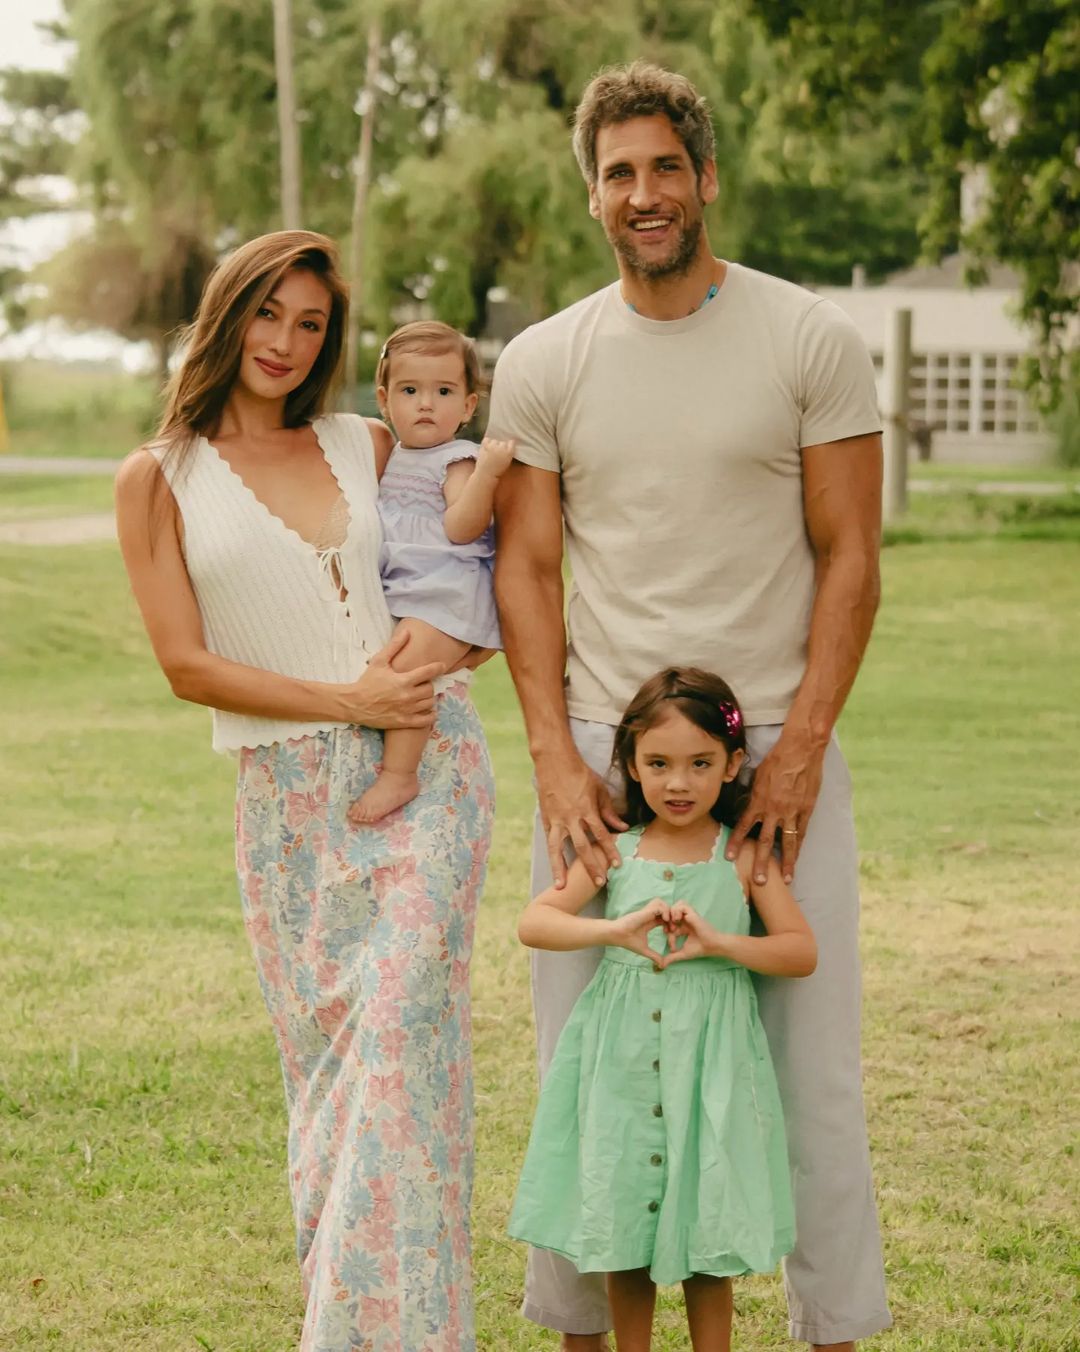 The celebrity family of Nico Bolzico and Solenn Heussaff go globetrotting for their 2023 holiday vacation as they first hit Paris and then Argentina.